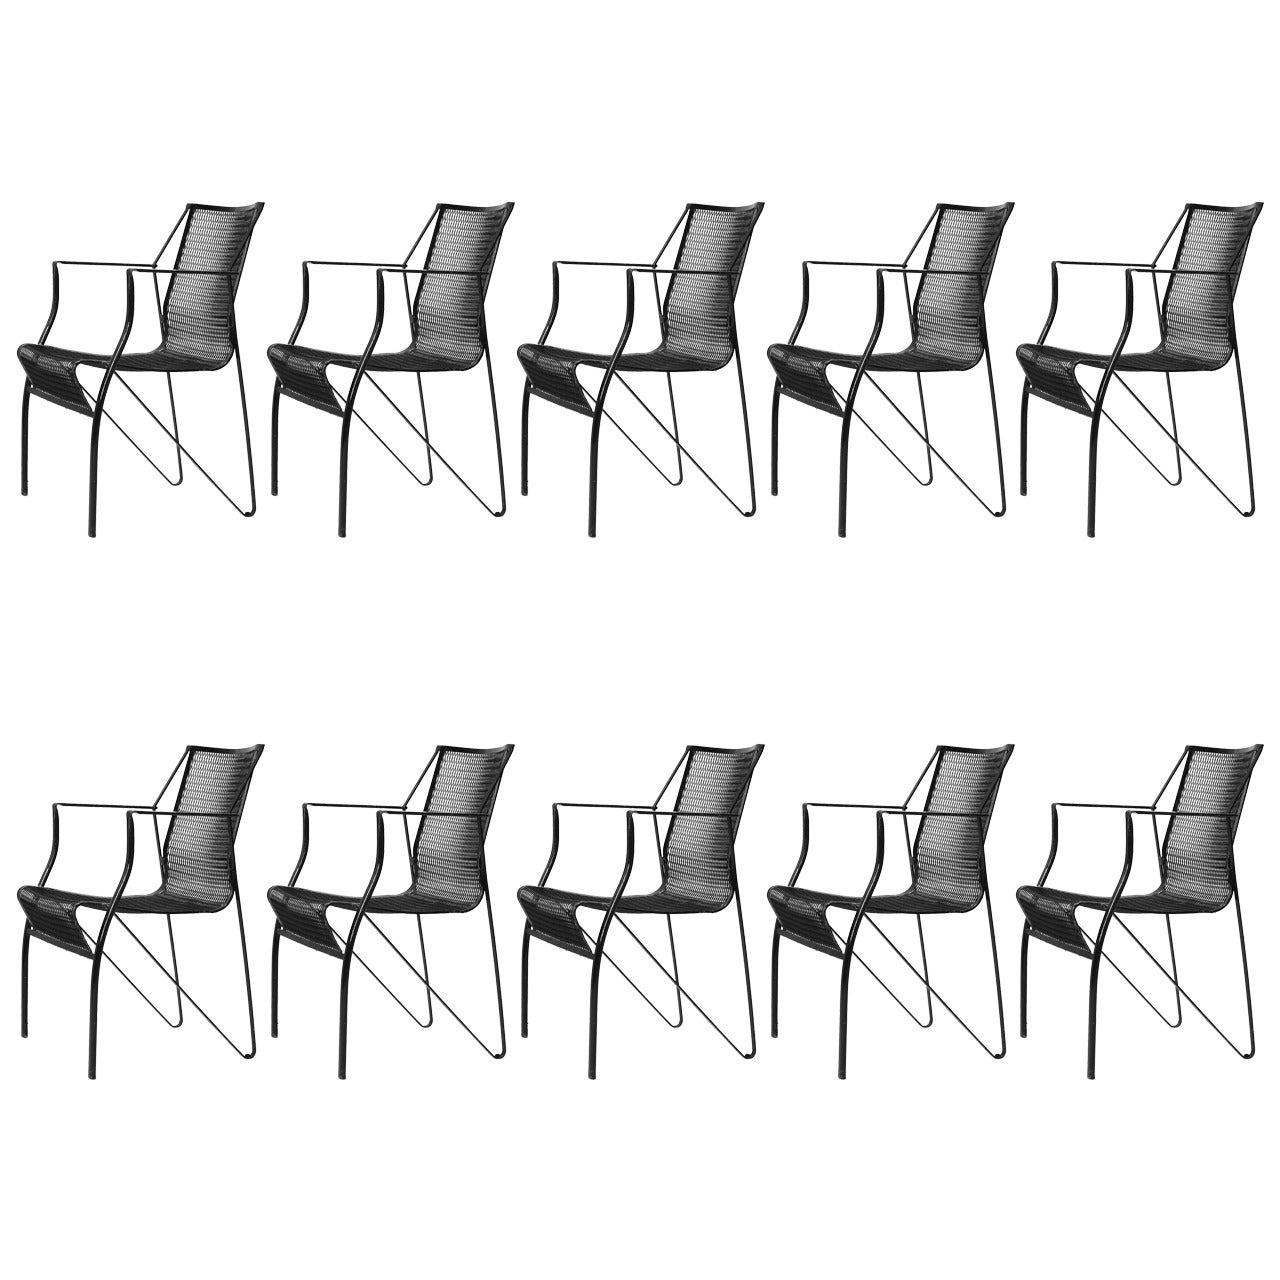 Set of 10 Iron Chairs - France, 1960s